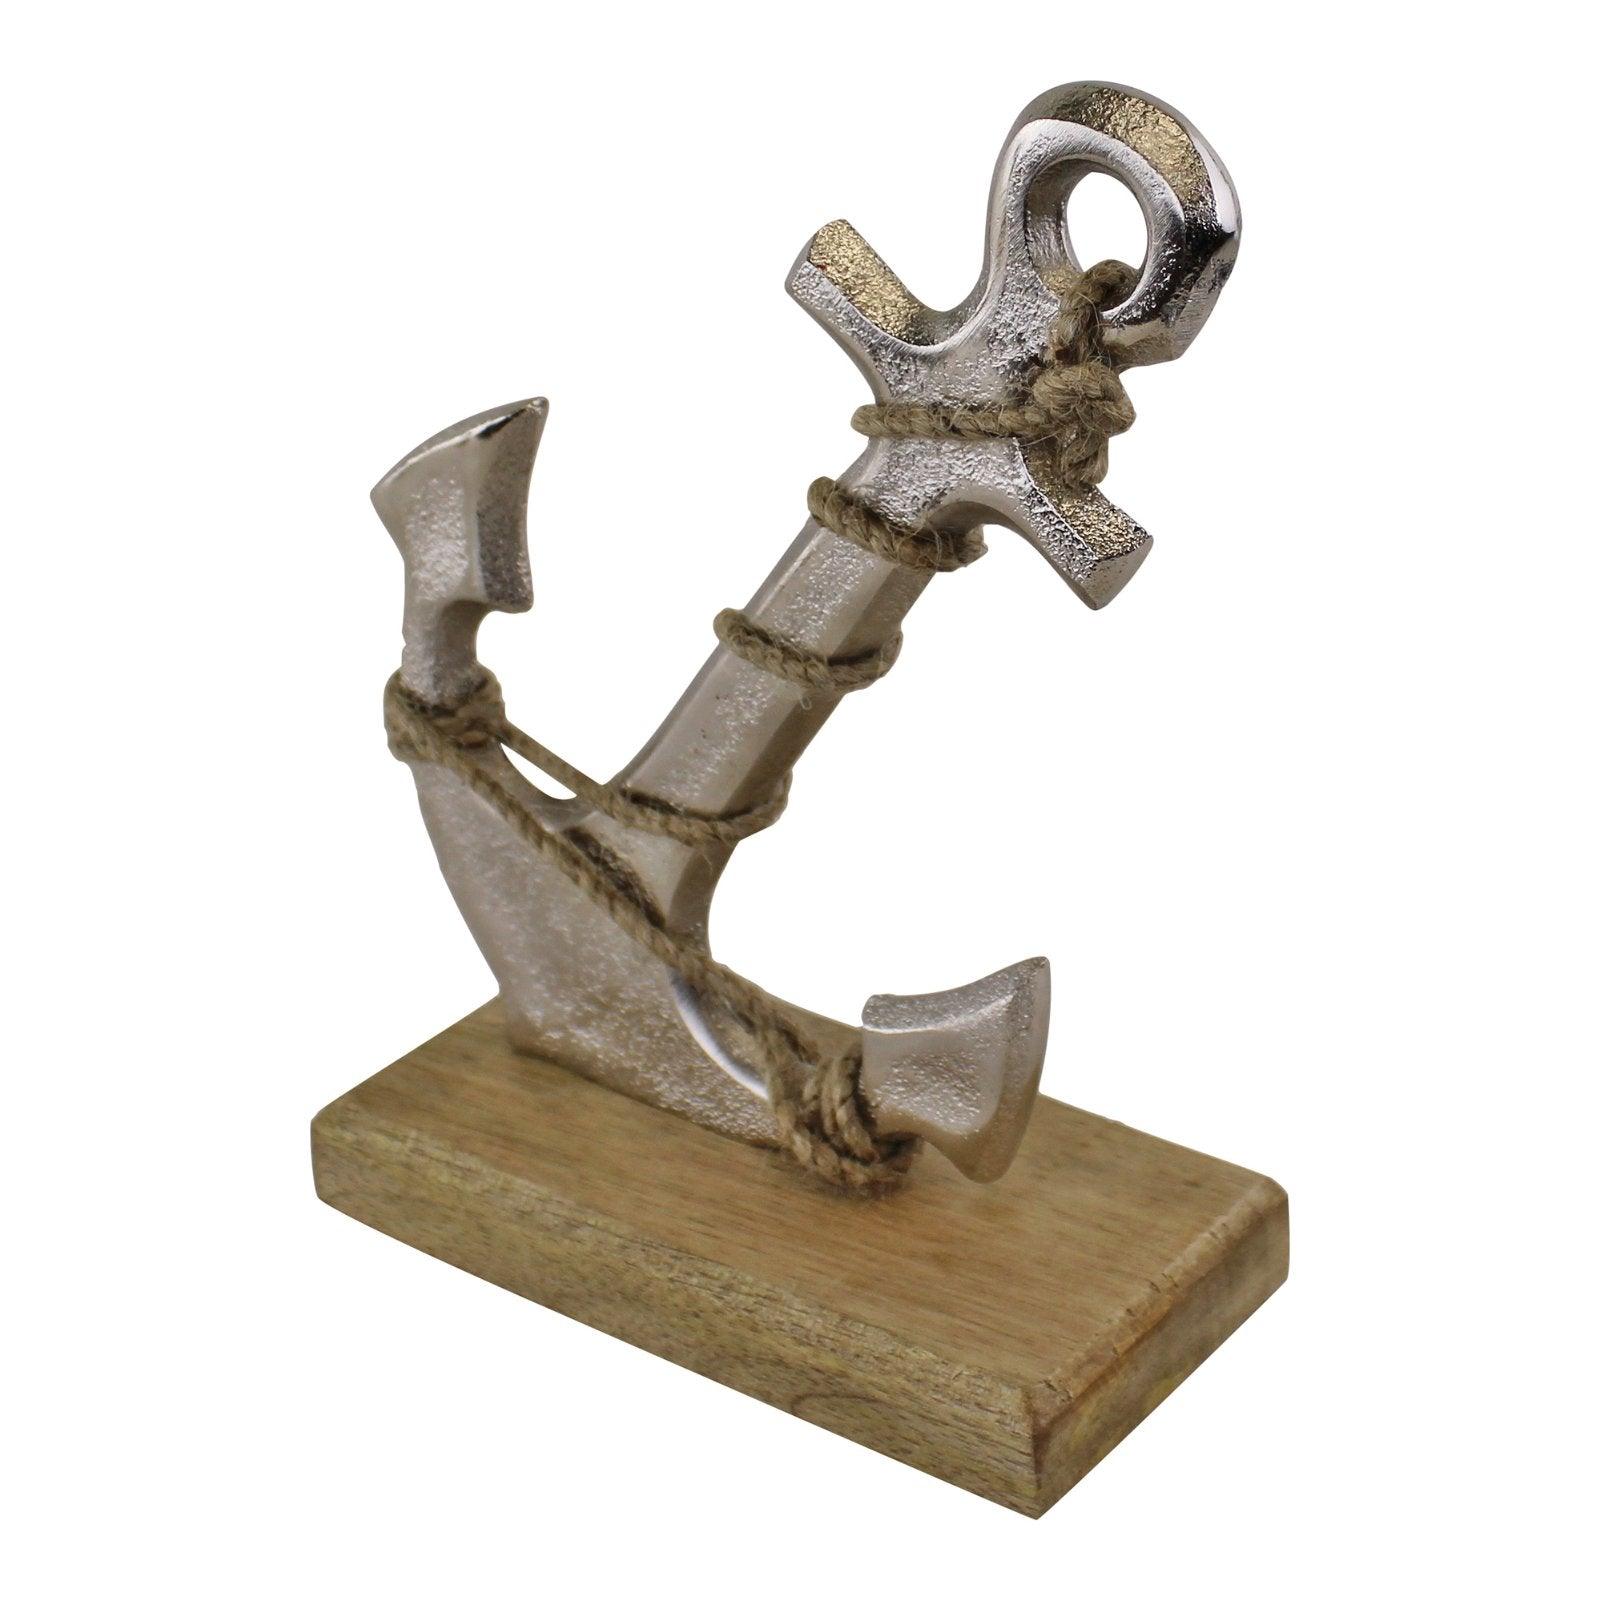 View Silver Metal Anchor Ornament On Wooden Base information